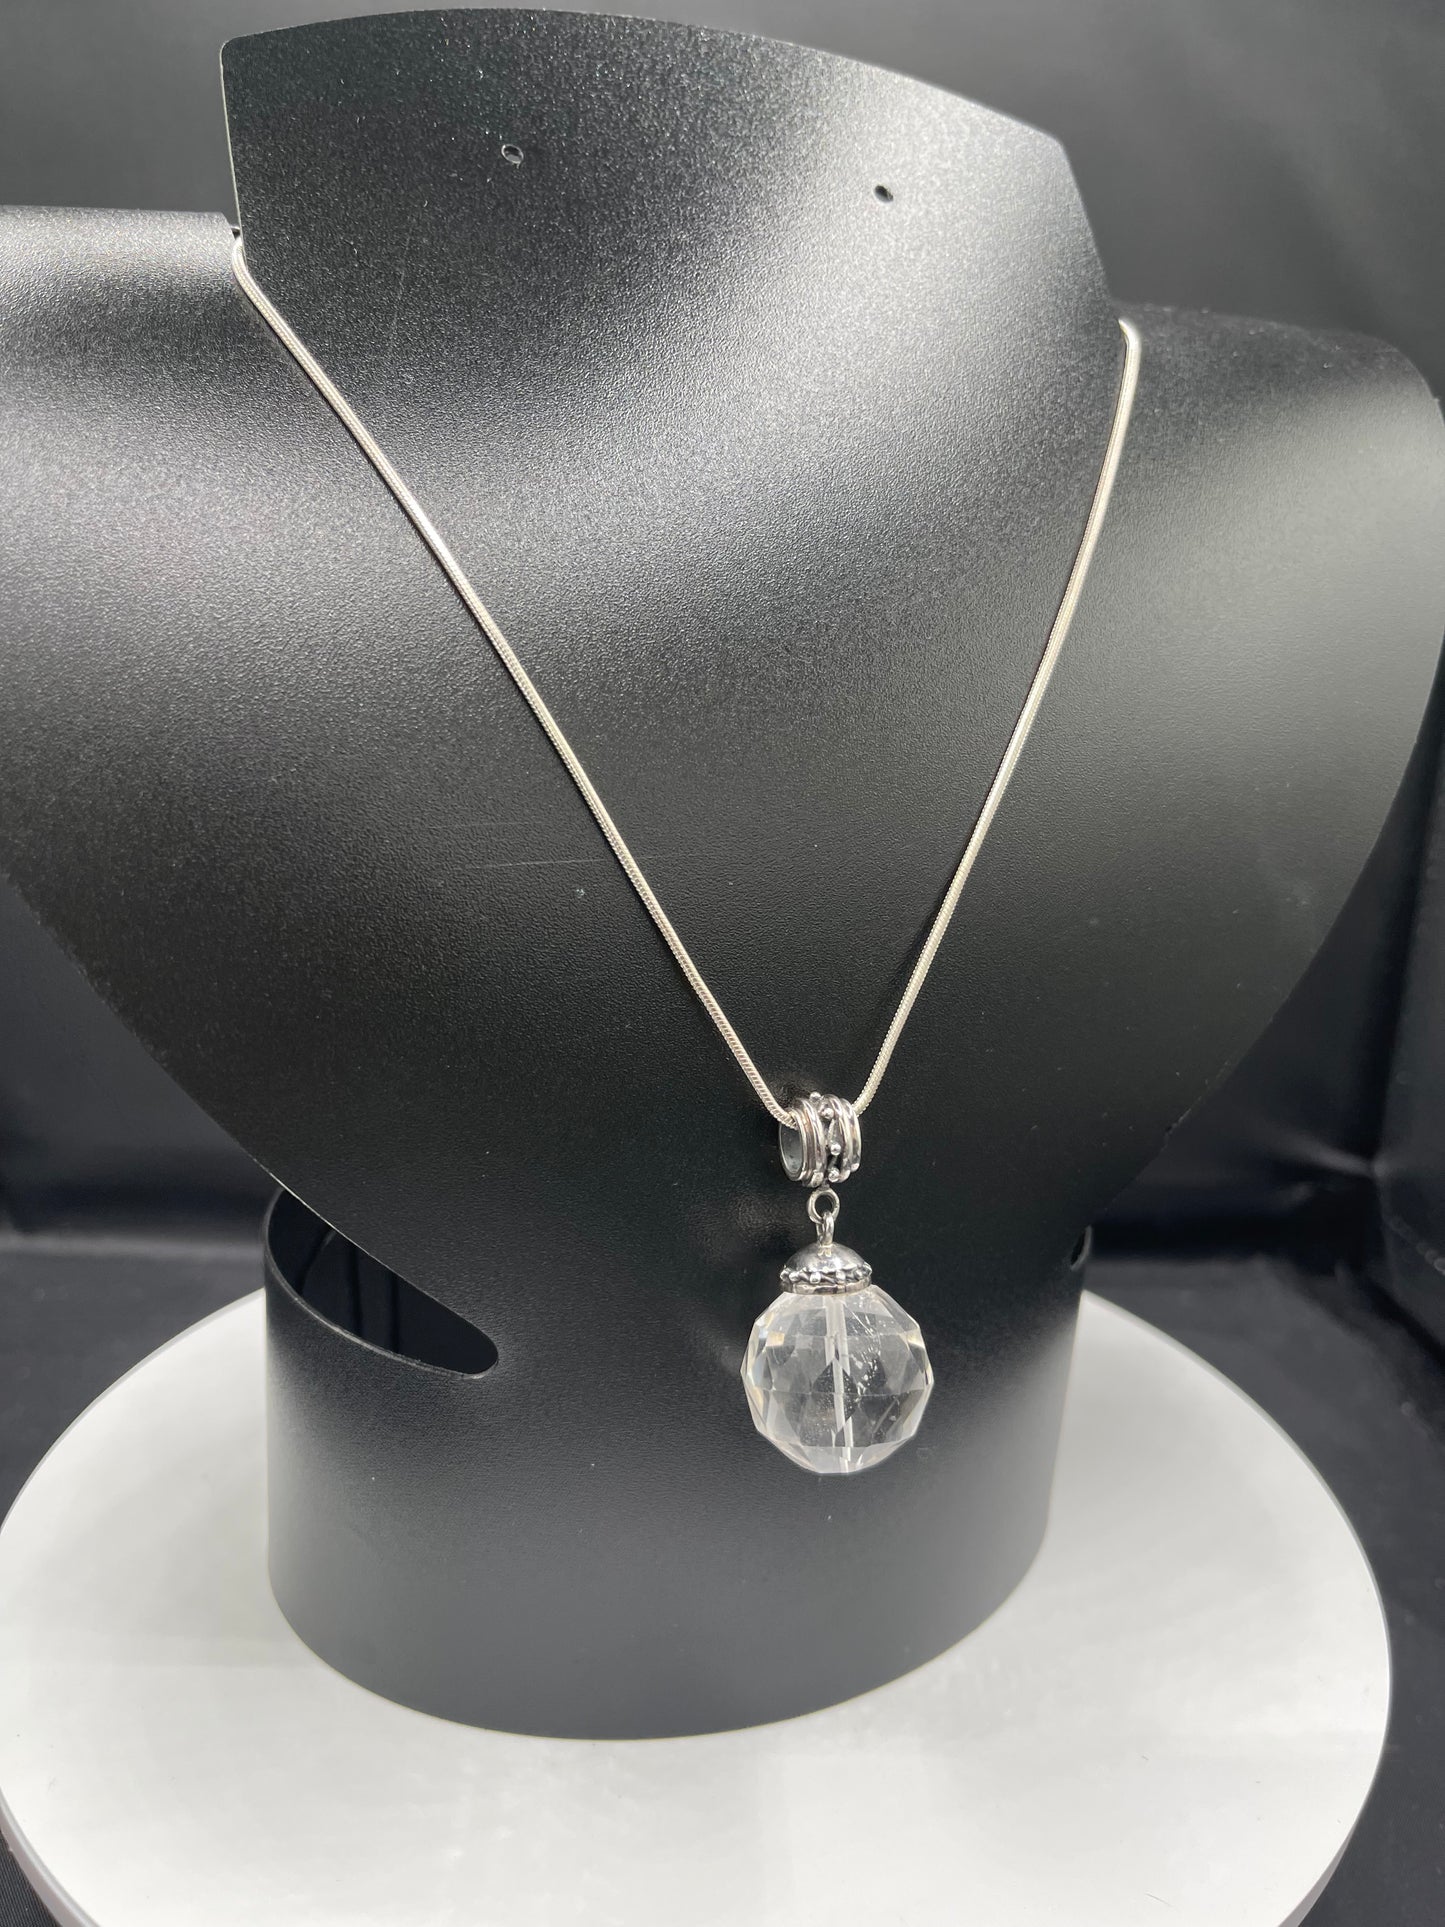 Natural Quartz Crystal Bali Style Sterling Silver Pendant & Sterling Silver Chain (19.75 inches)